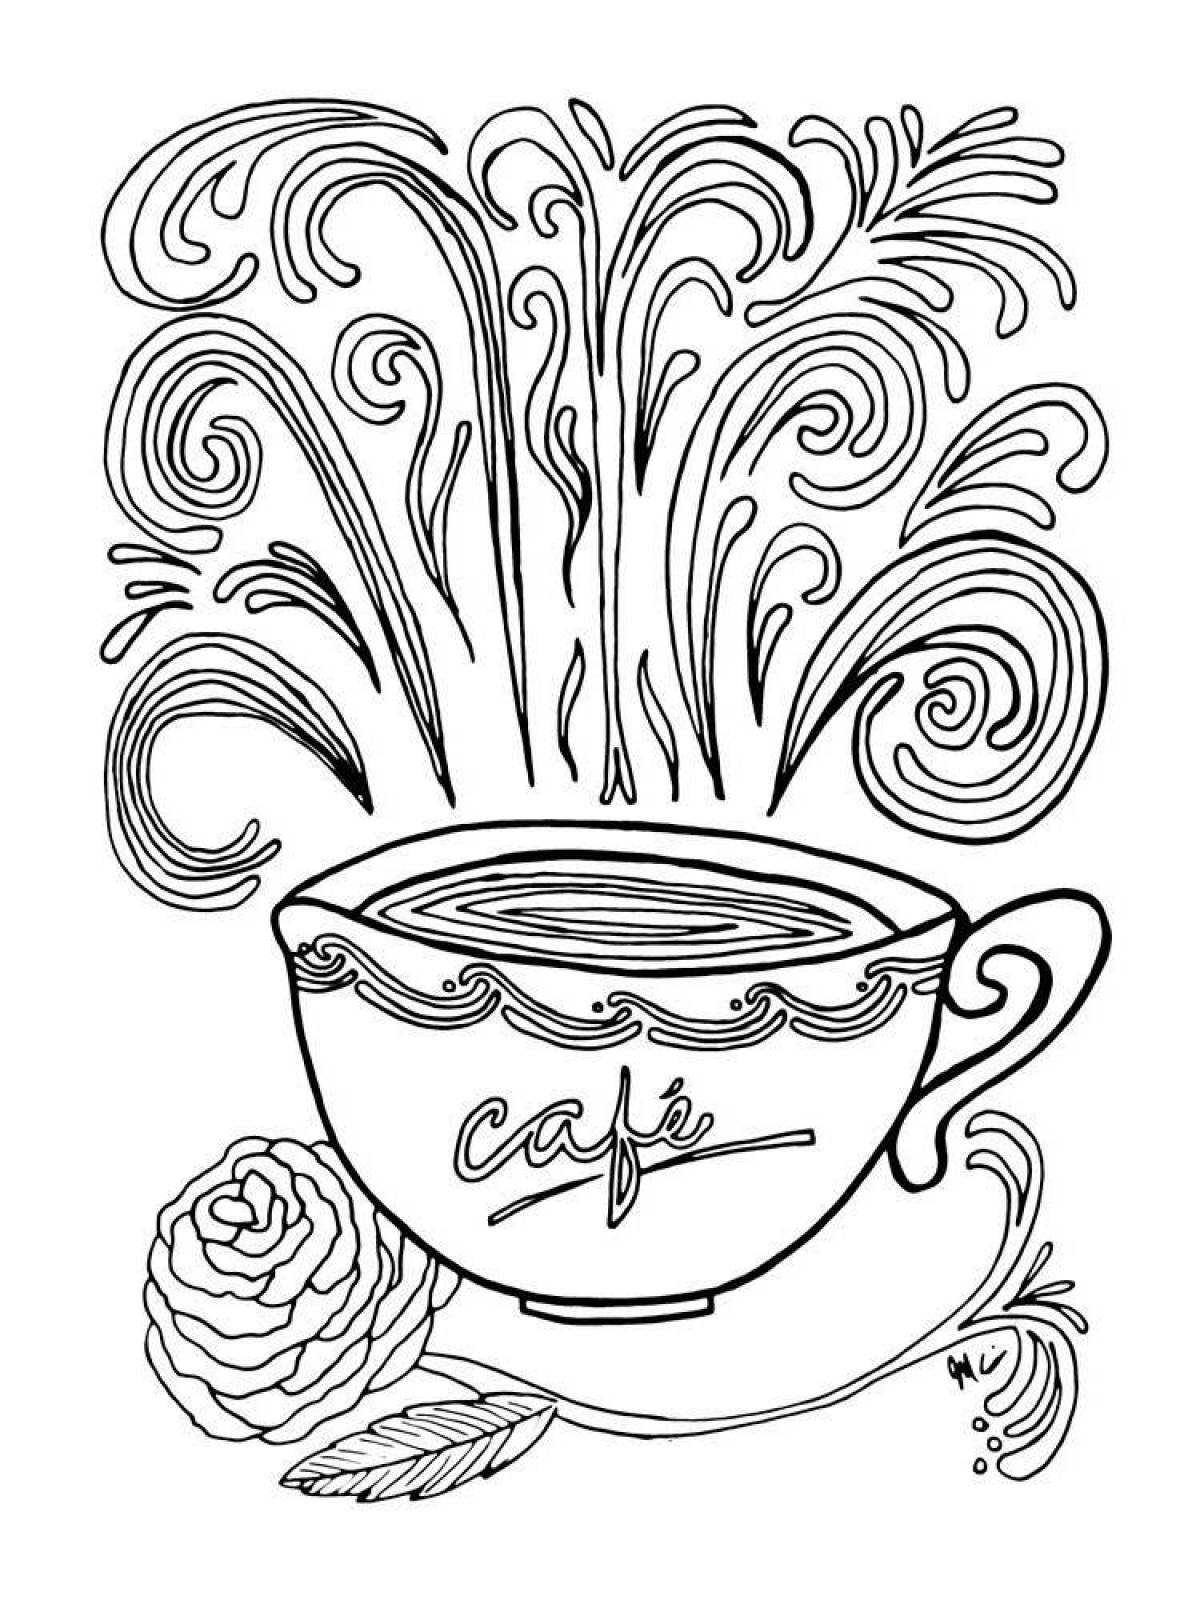 Colorful coffee coloring page